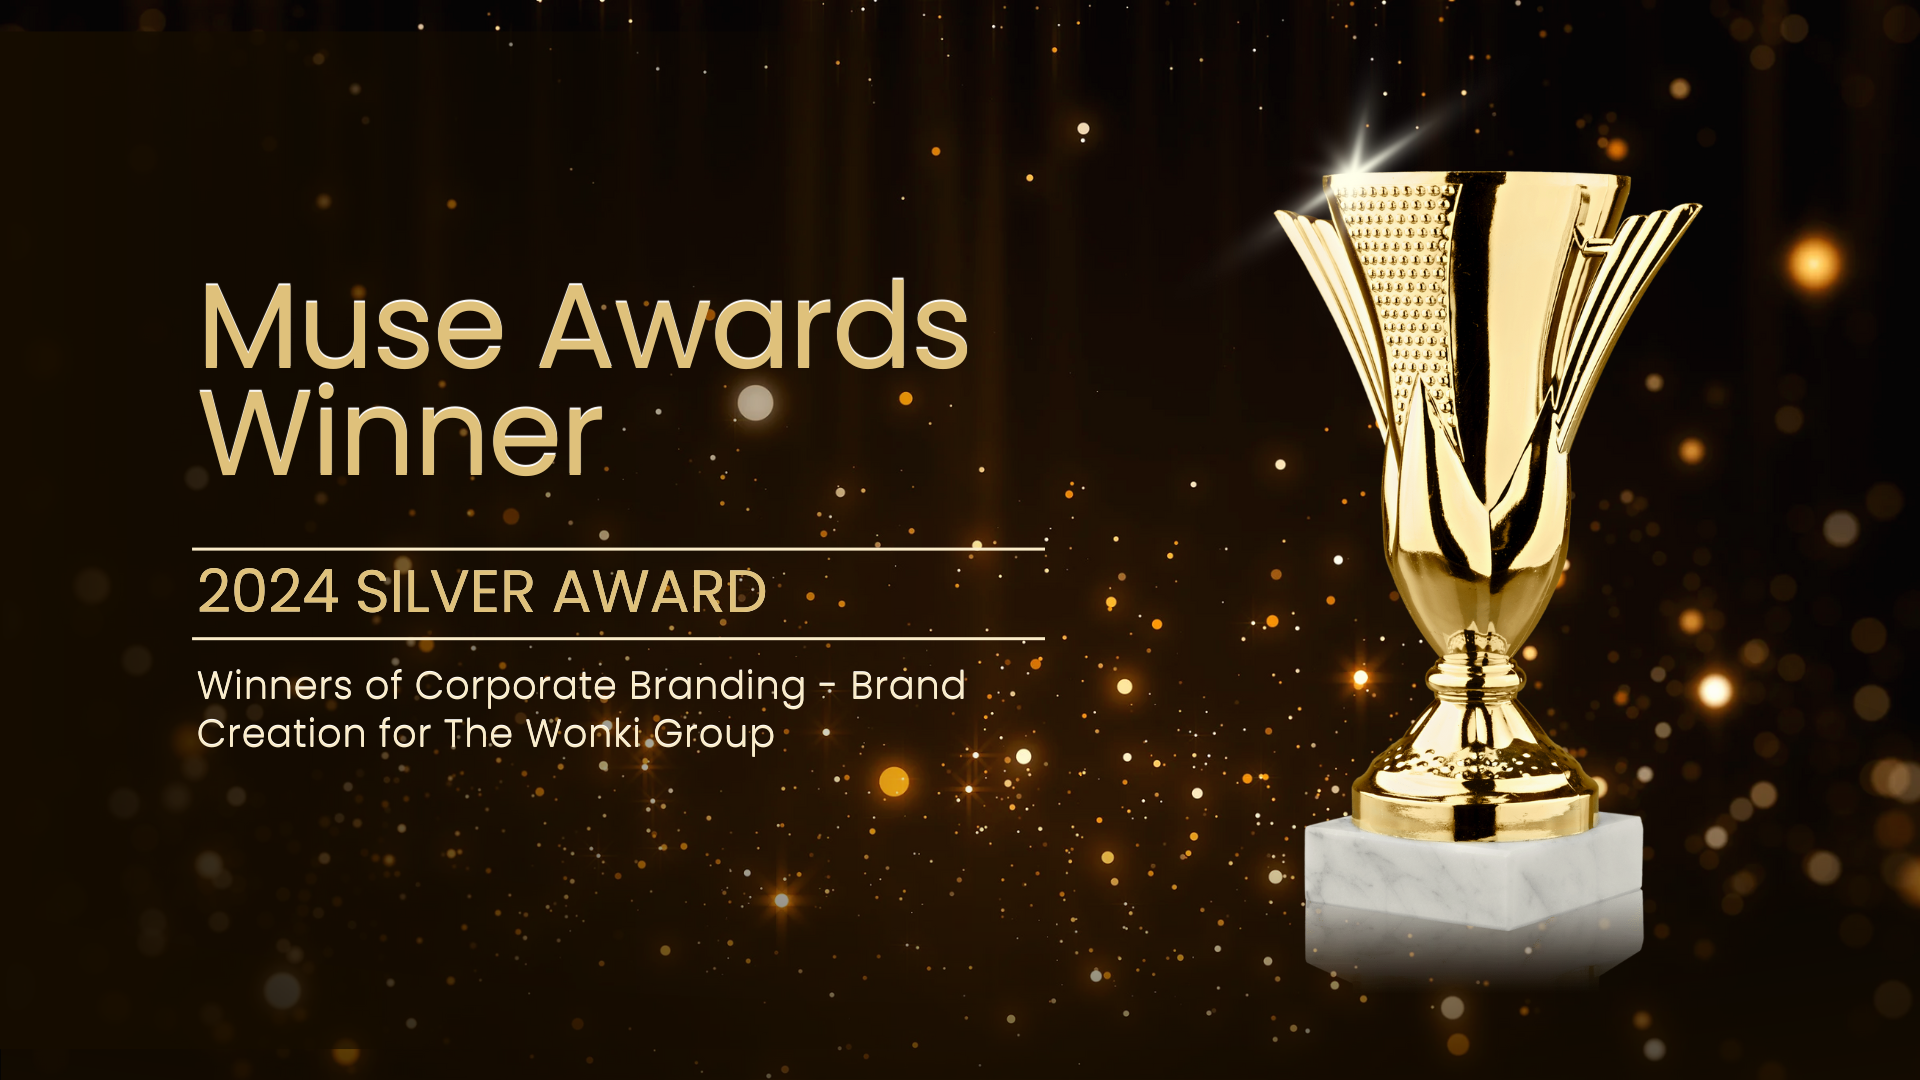 Blue Whale Media Wins the Muse Awards 2024 Silver Award for Corporate Branding - Wonki Collective